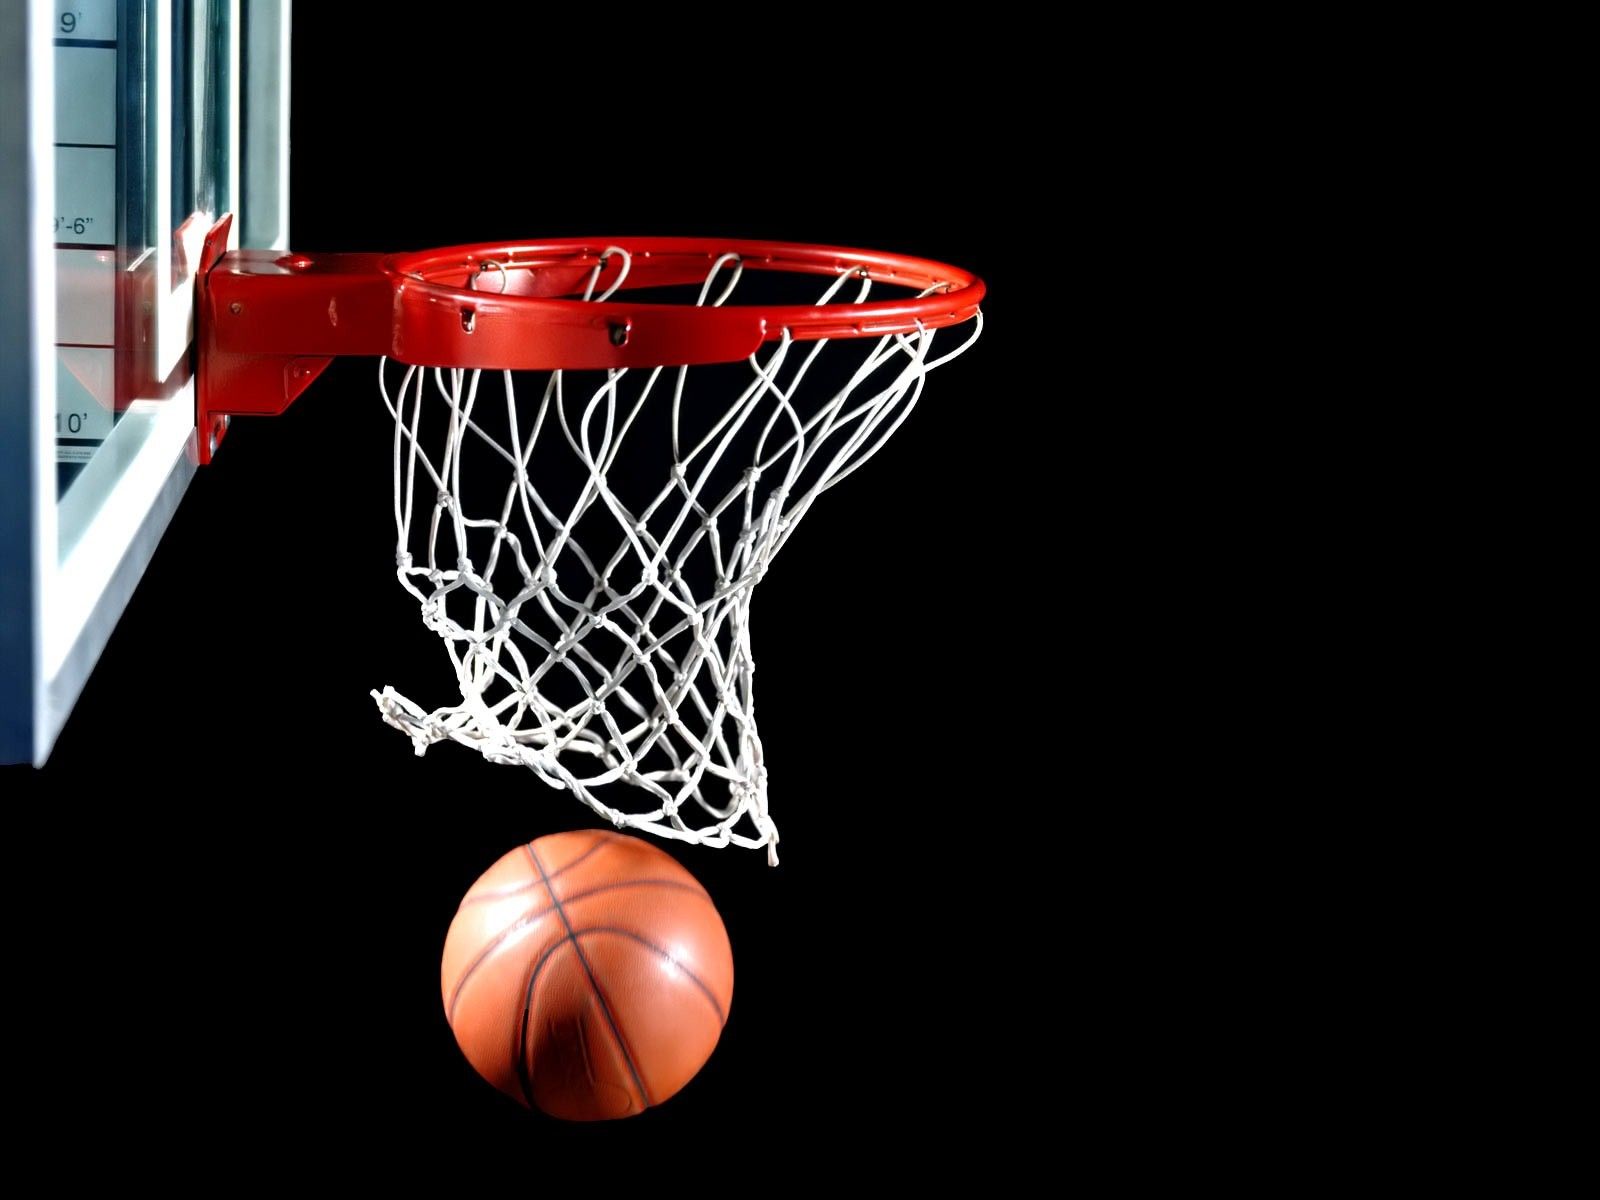 Basketball Wallpapers Free Download HD Wonderful New Sports Images